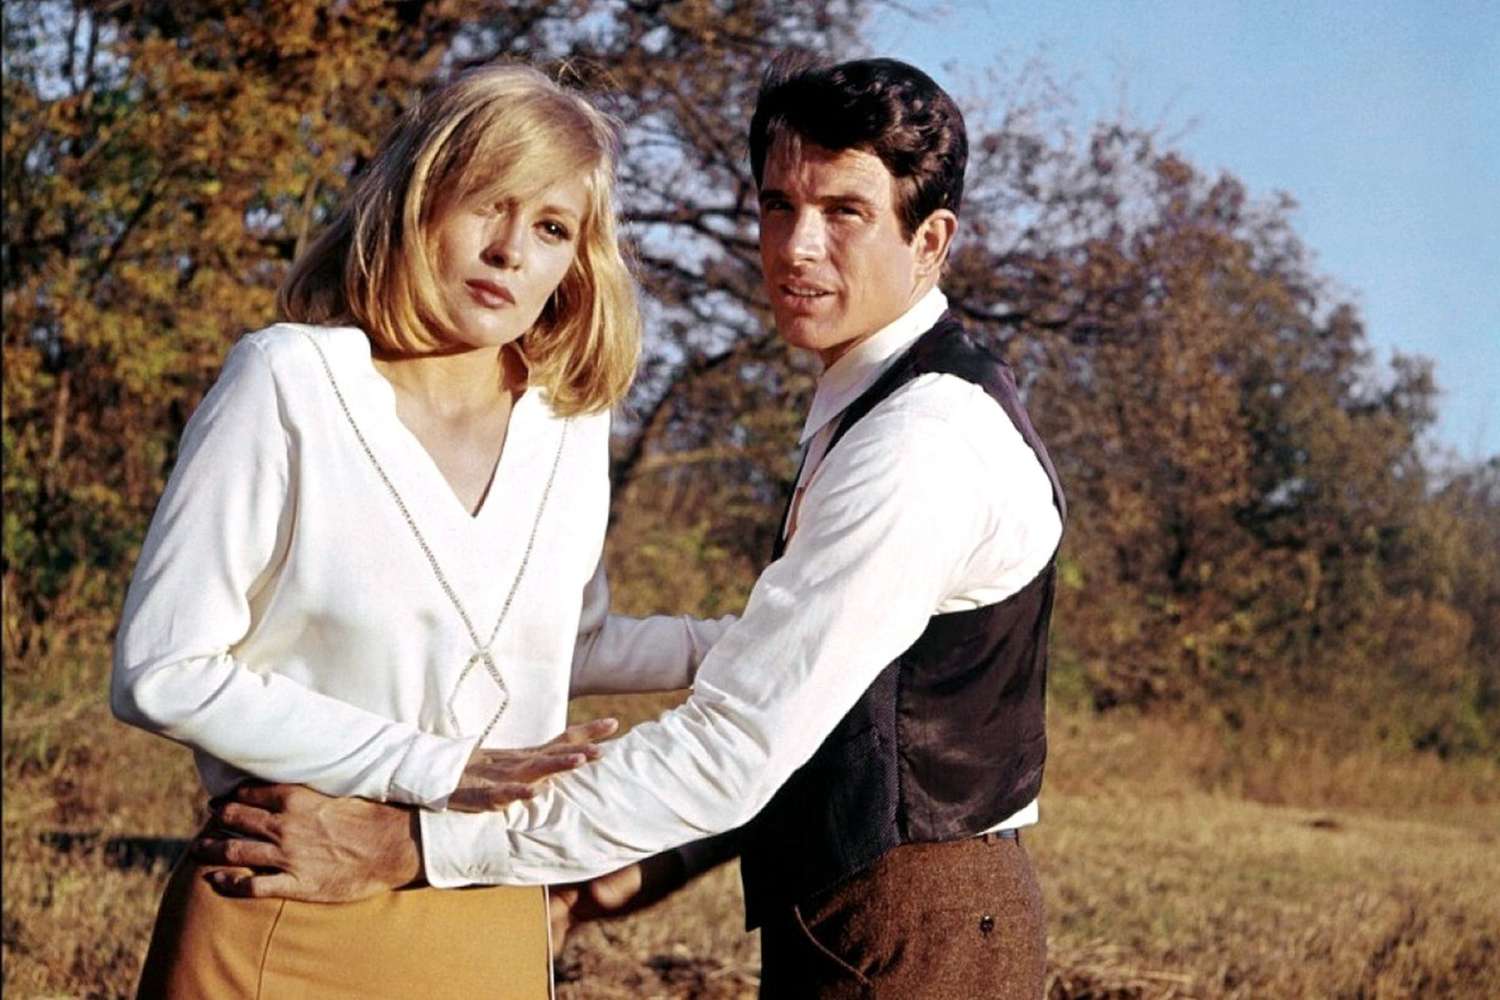 BONNIE AND CLYDE - BONNIE AND CLYDE 1967 DIRECTED BY ARTHUR PENN Faye Dunaway and Warren Beatty - 19